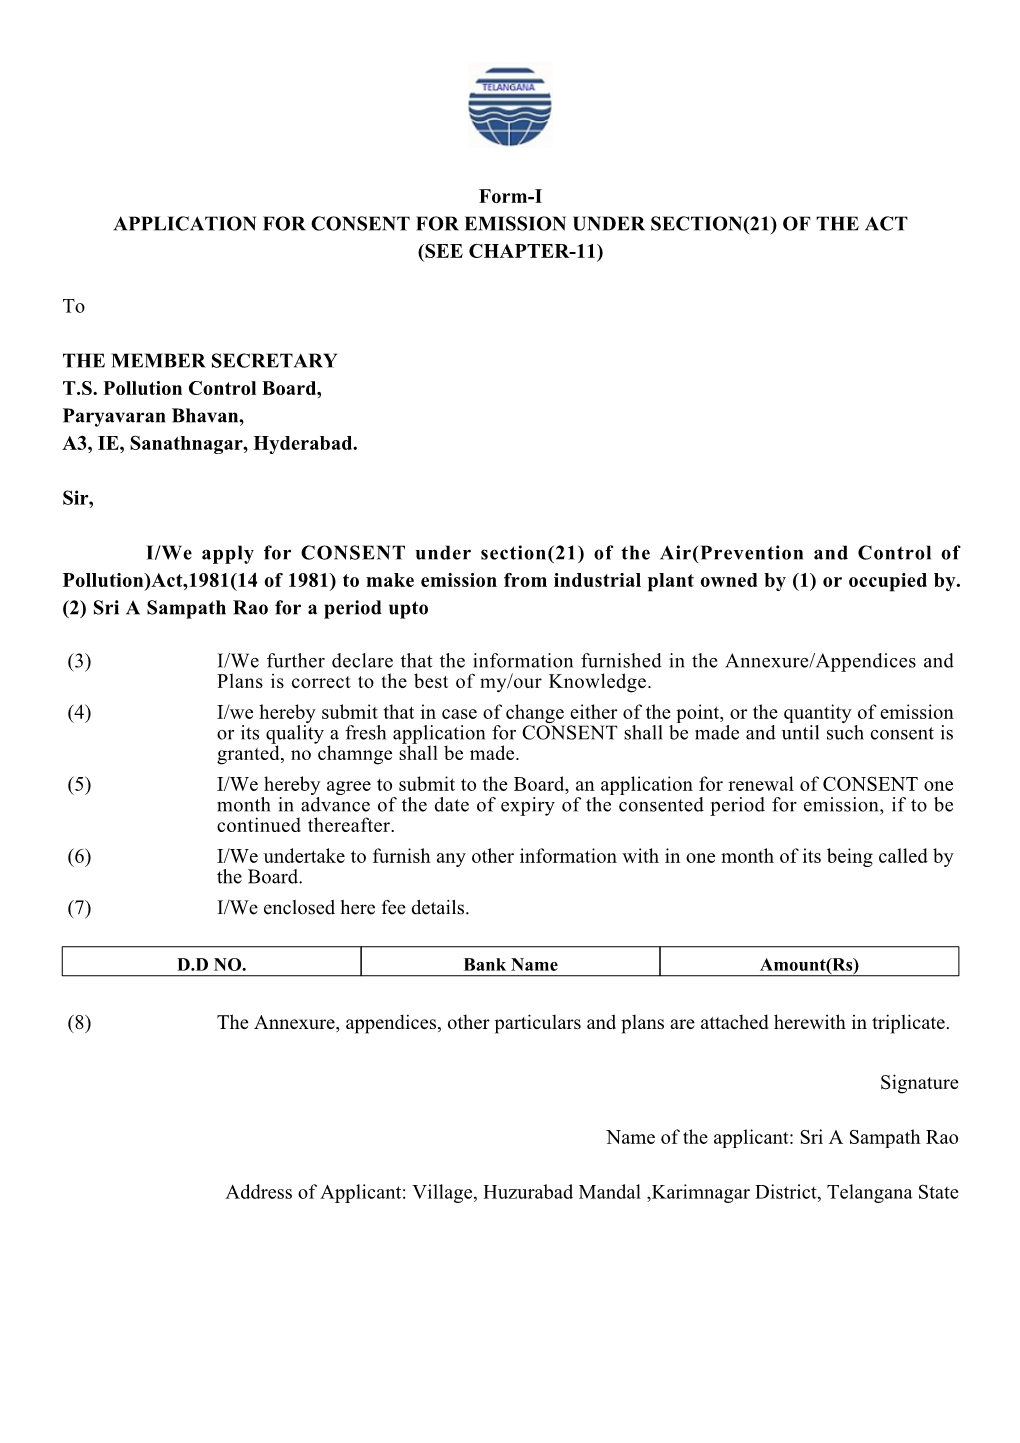 Form-I APPLICATION for CONSENT for EMISSION UNDER SECTION(21) of the ACT (SEE CHAPTER-11) to the MEMBER SECRETARY T.S. Pollution